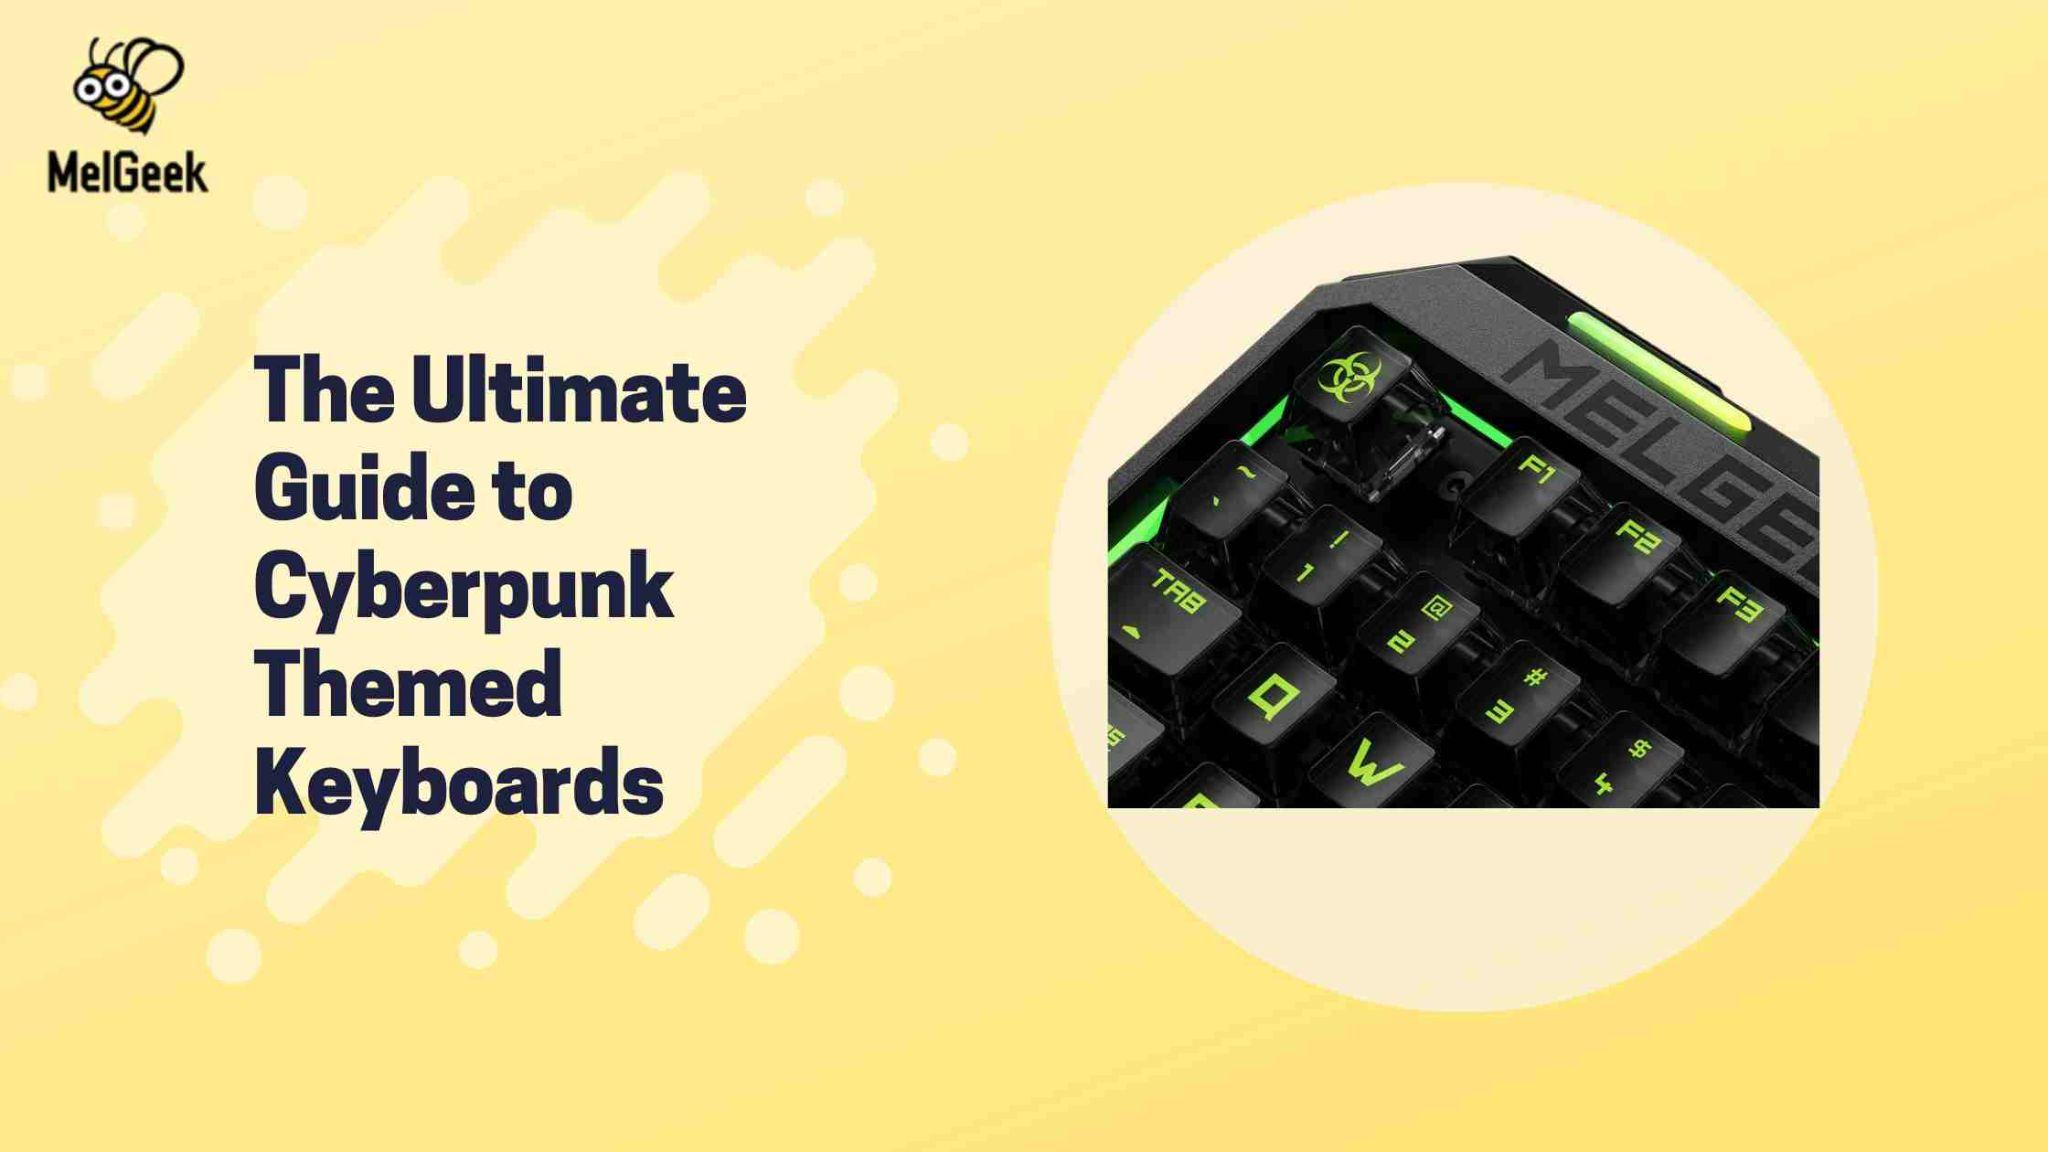 The Ultimate Guide to Cyberpunk Themed Keyboards